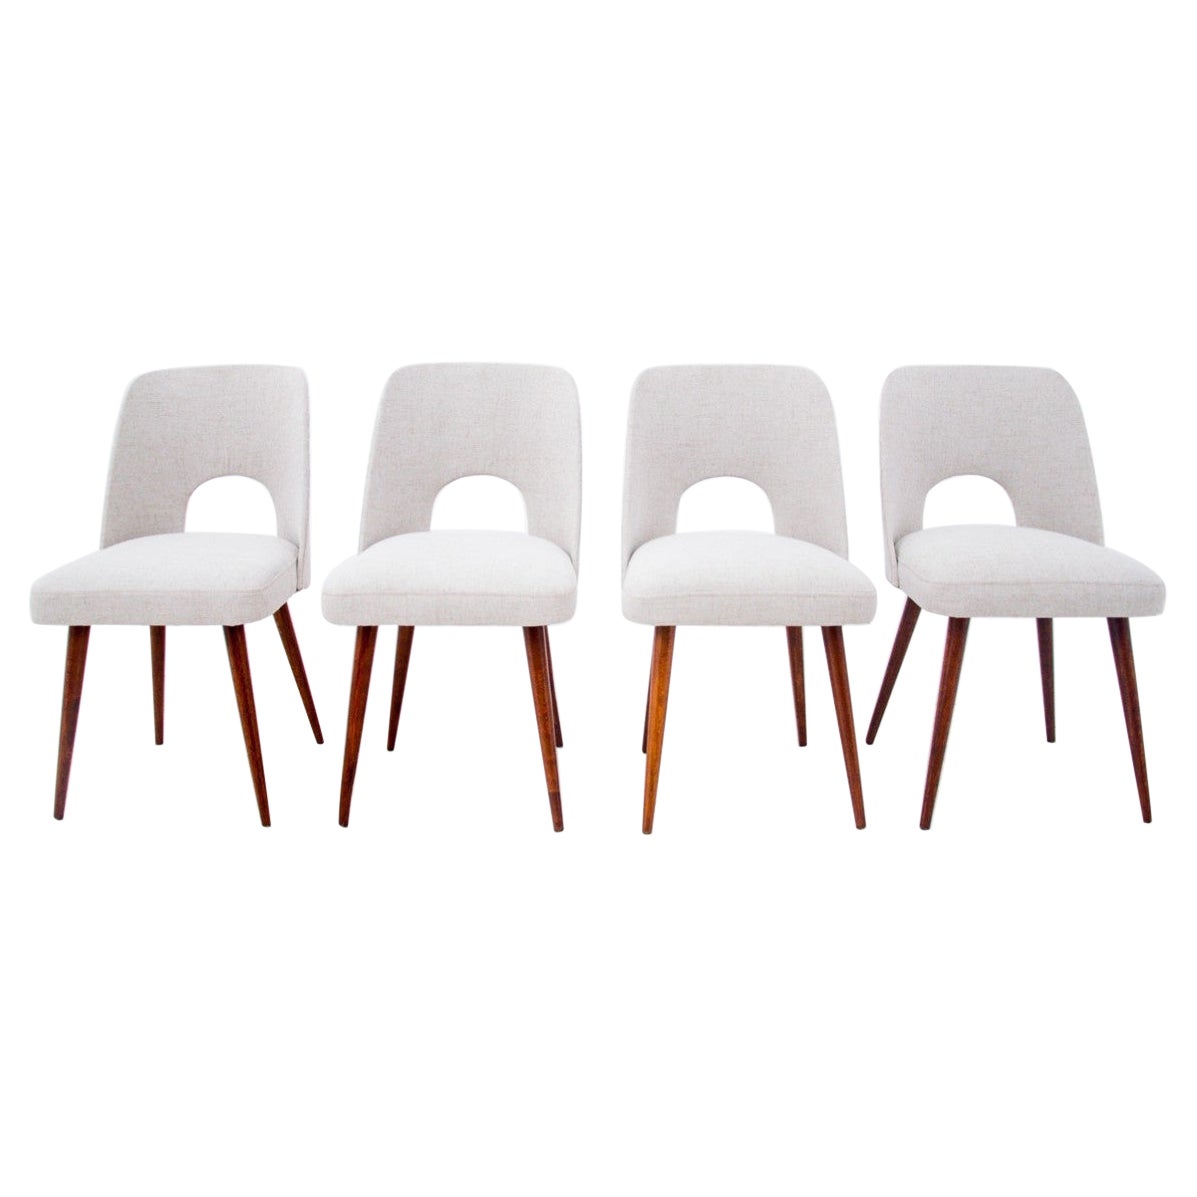 Set of four beige midcentury vintage chairs, Poland, 1960s.